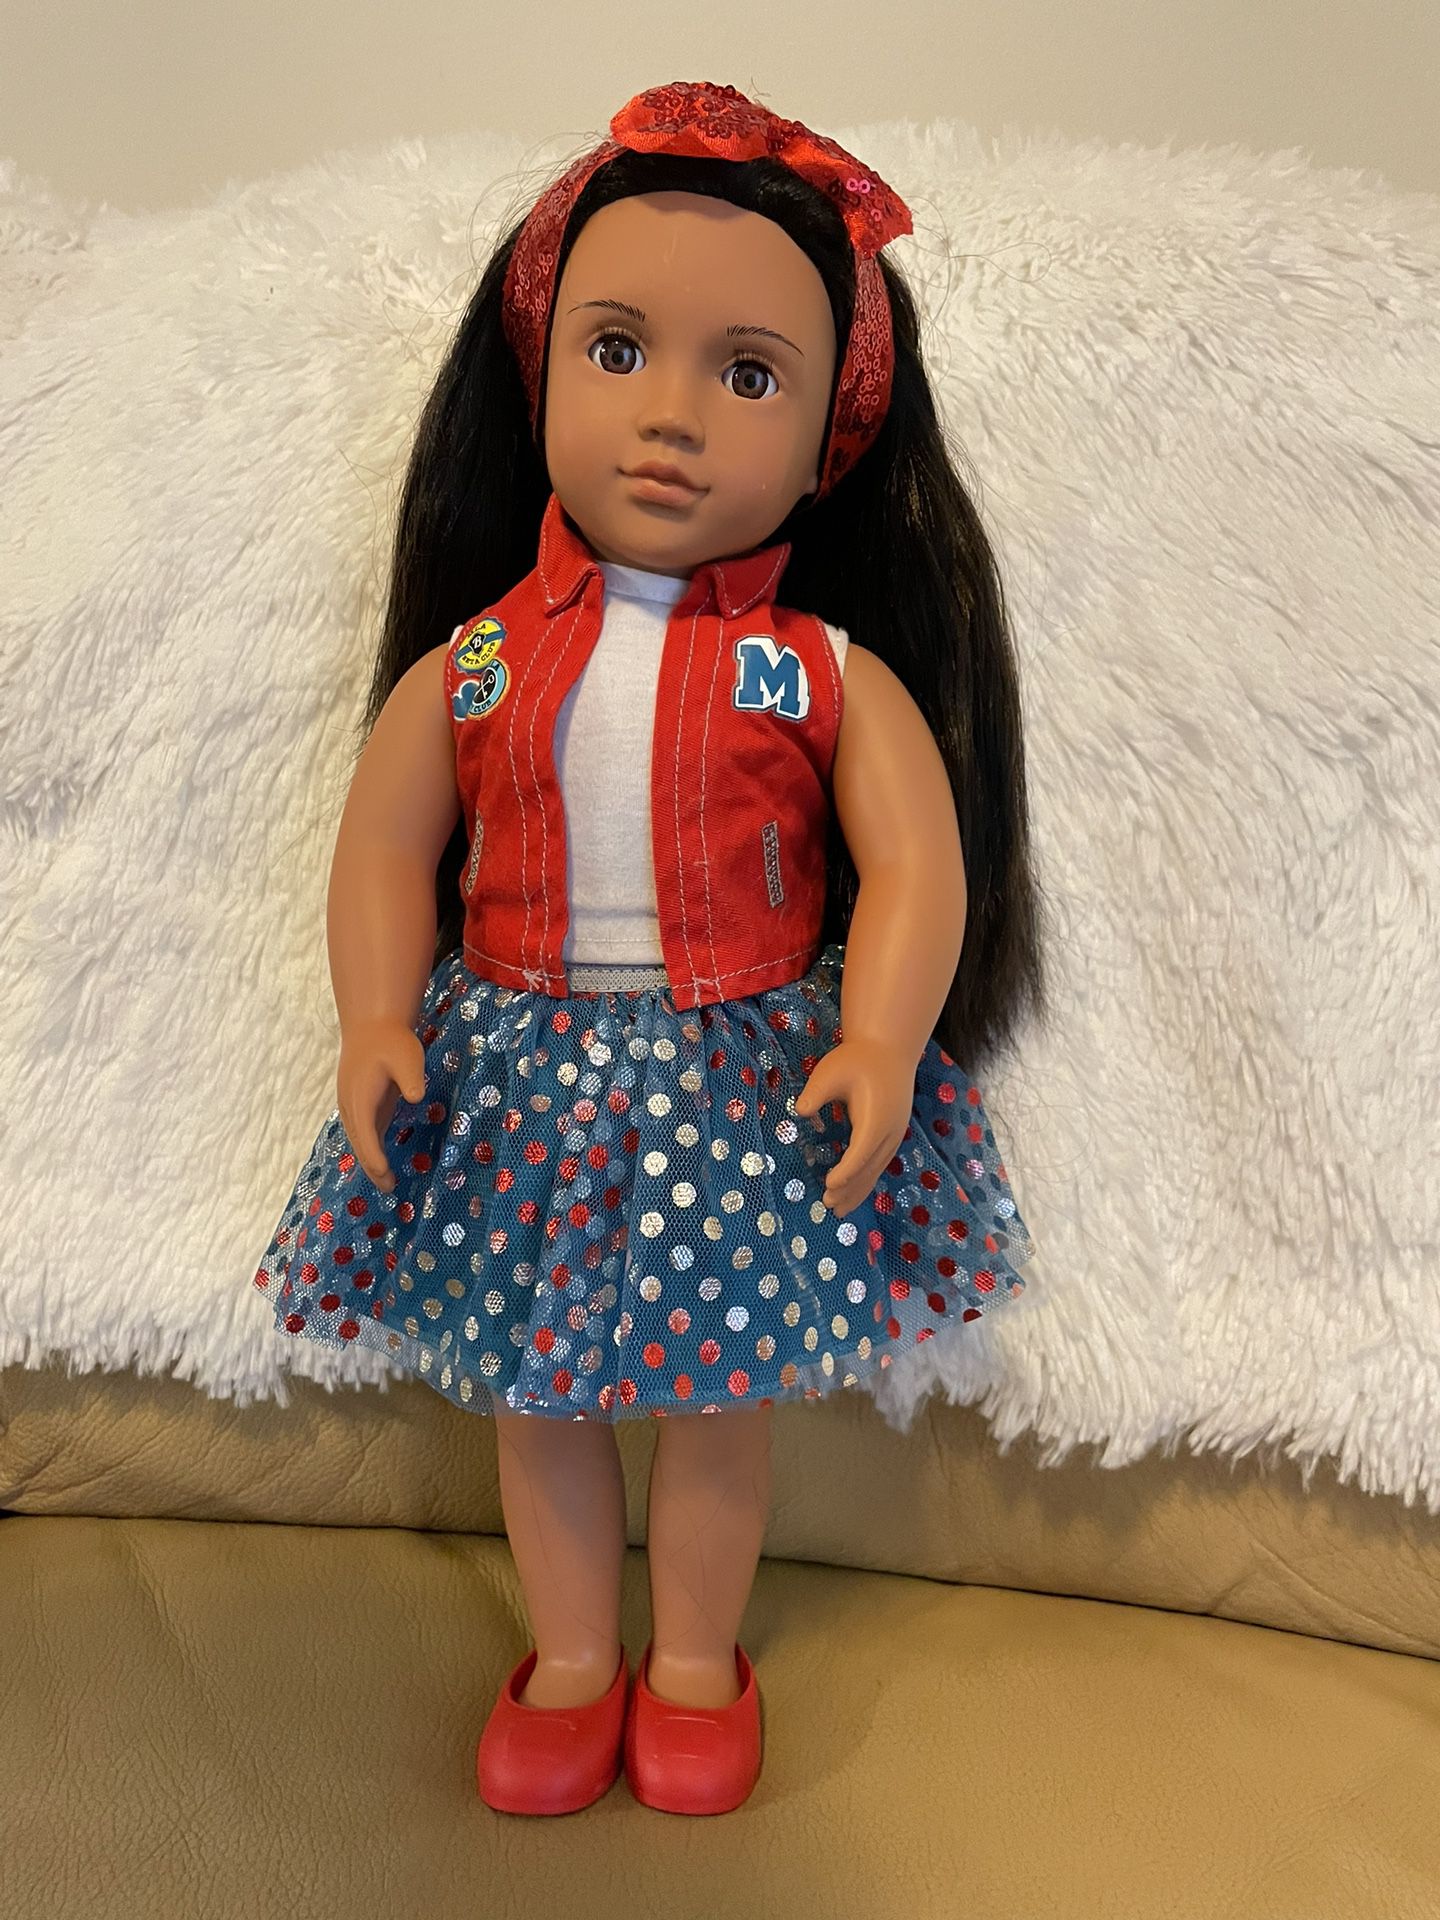 Our Generation Doll. $10.